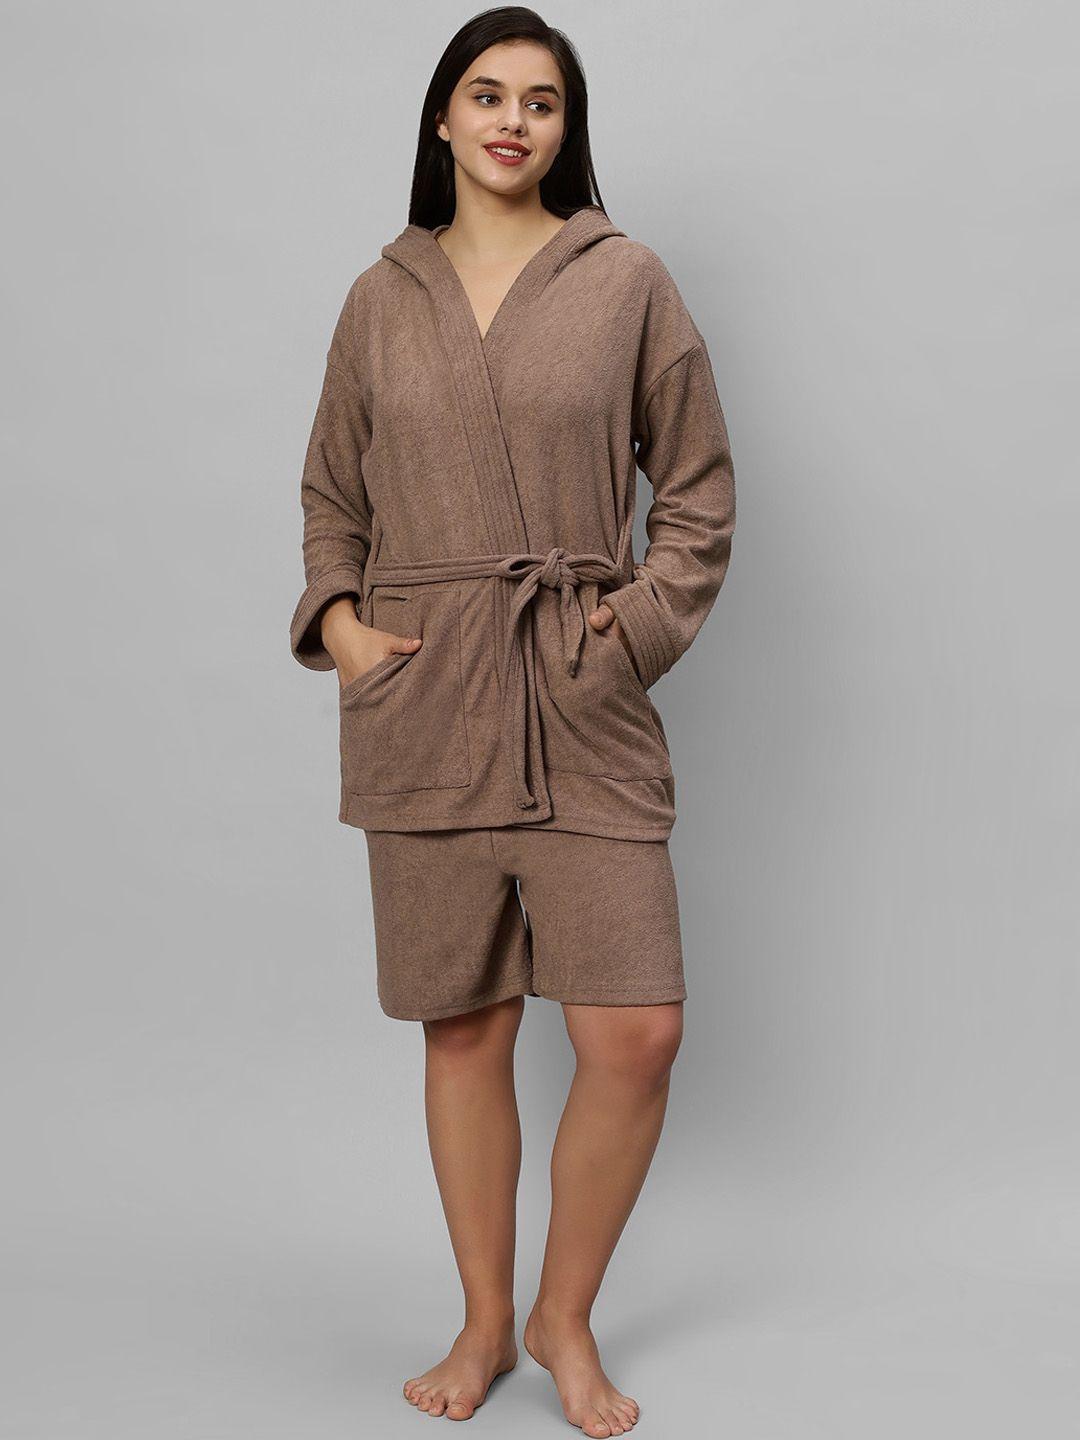 lacylook women hooded double terry bathrobe with shorts